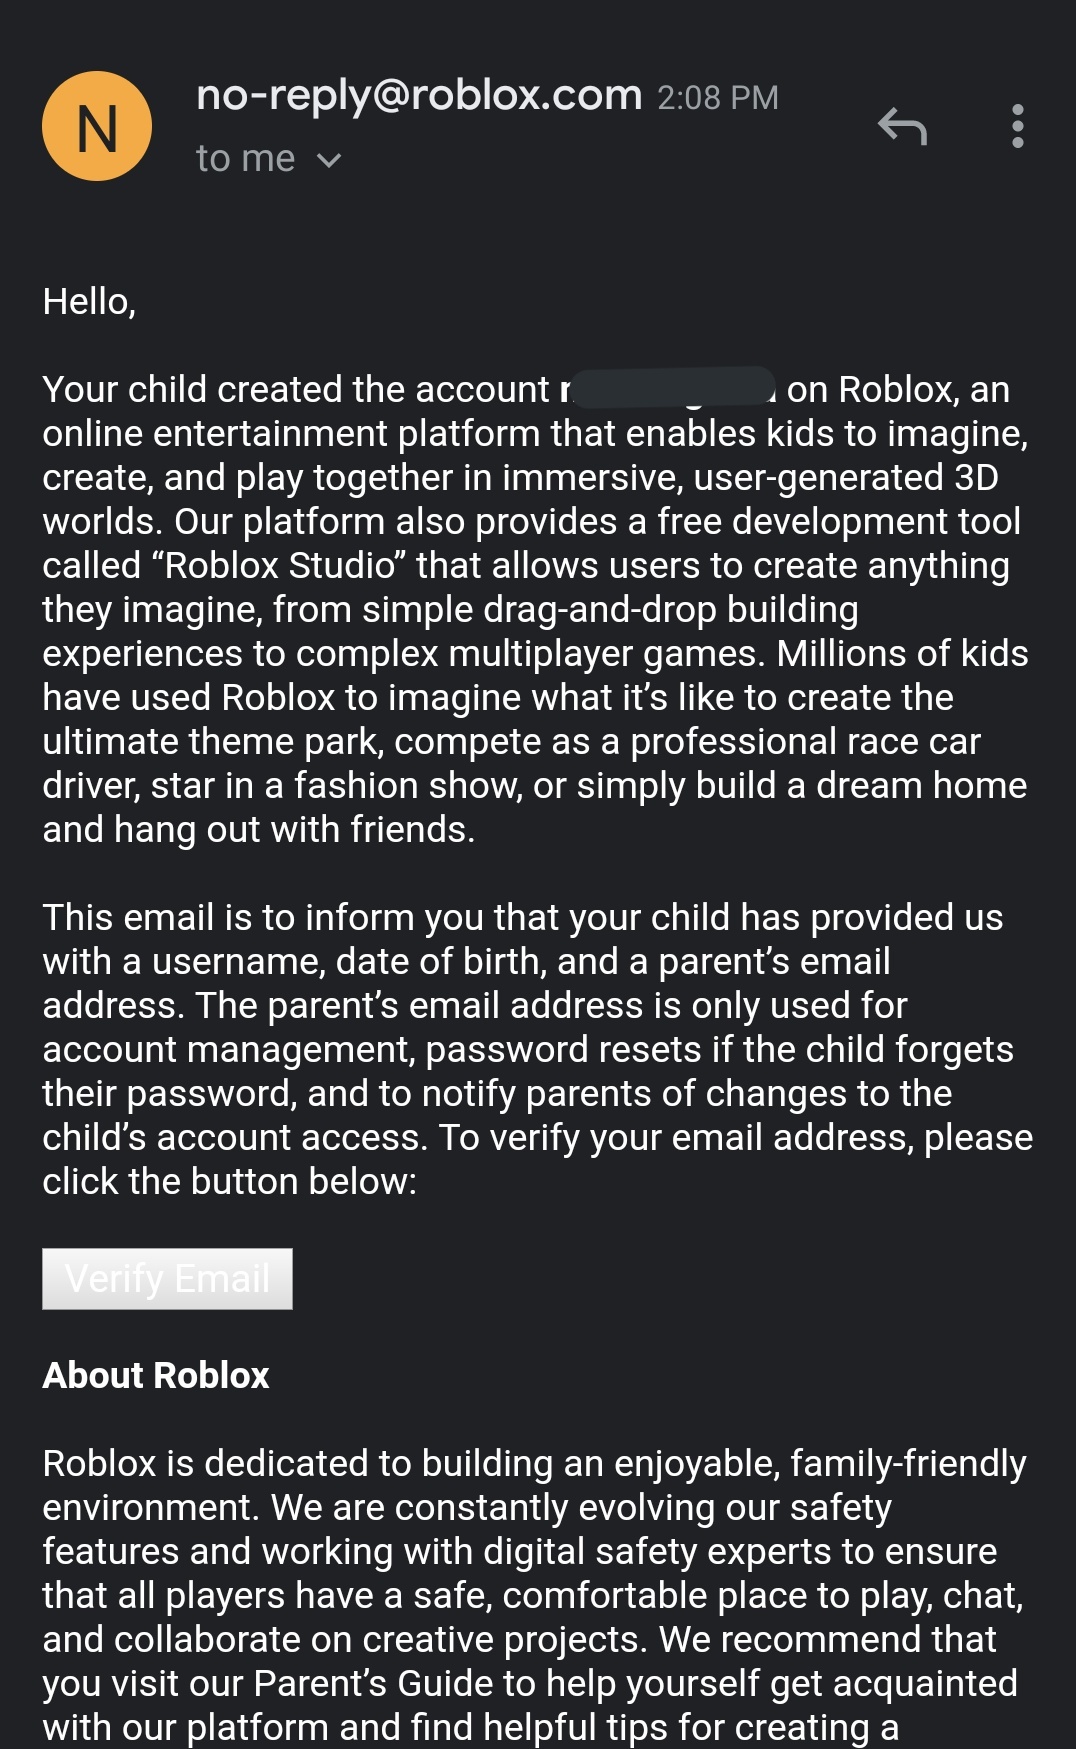 Mikehaze On Twitter I Get This Msg Everyday From Roblox About A Child Who Needs Me To Verify Their Account So They Can Play I Tried To Verify The Email But I - find roblox email